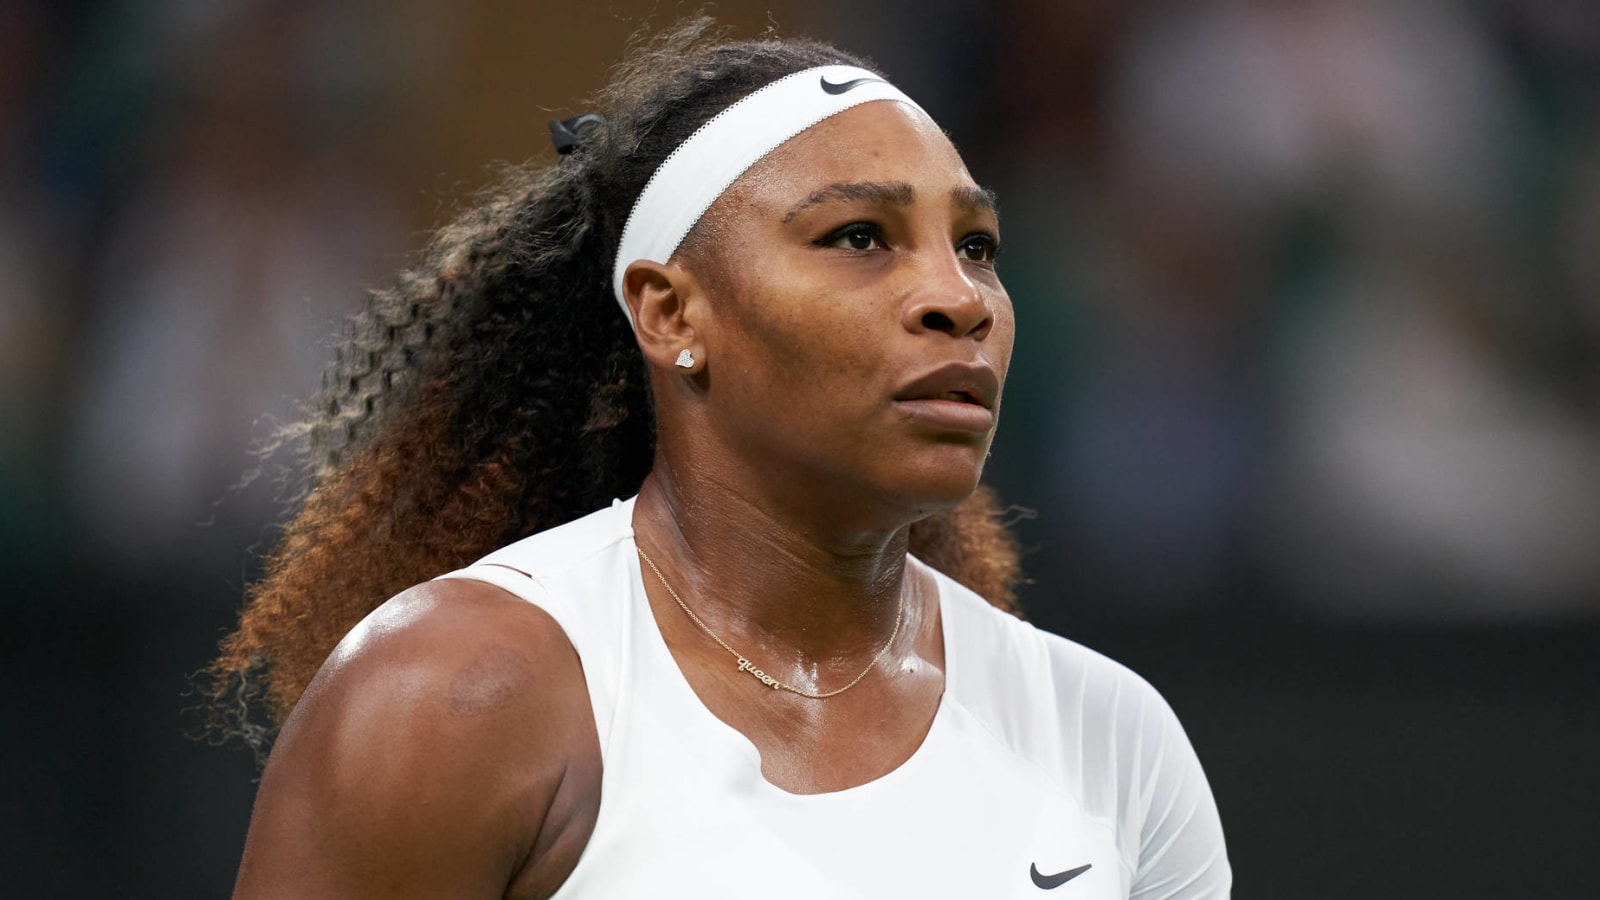 Serena Williams withdraws from U.S. Open